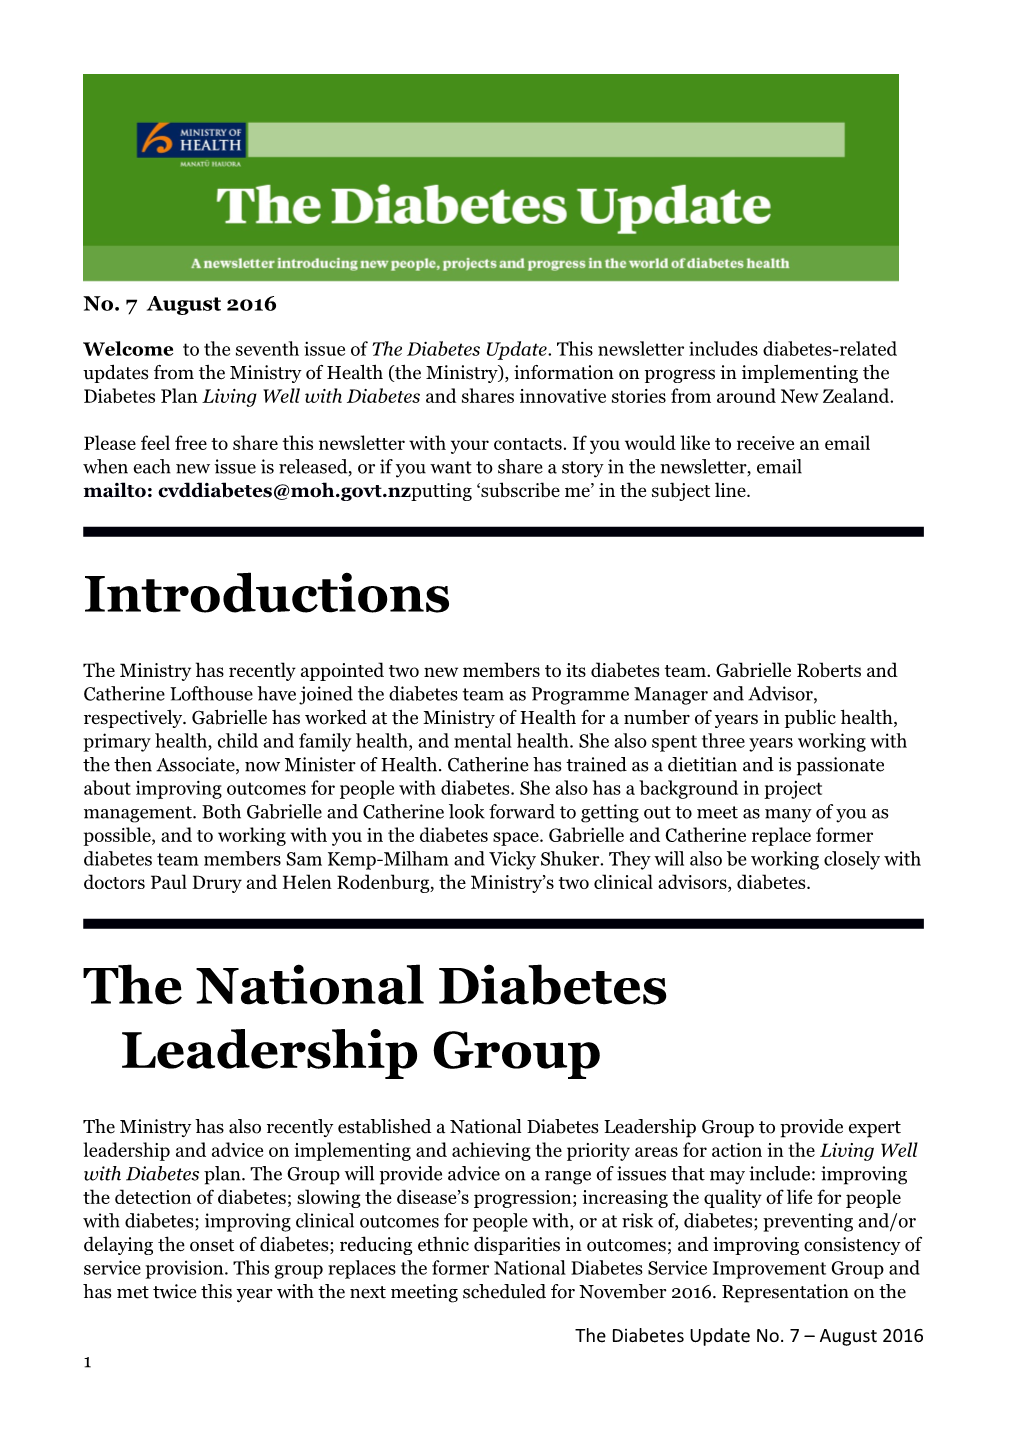 The Diabetes Update No. 7 August 2016